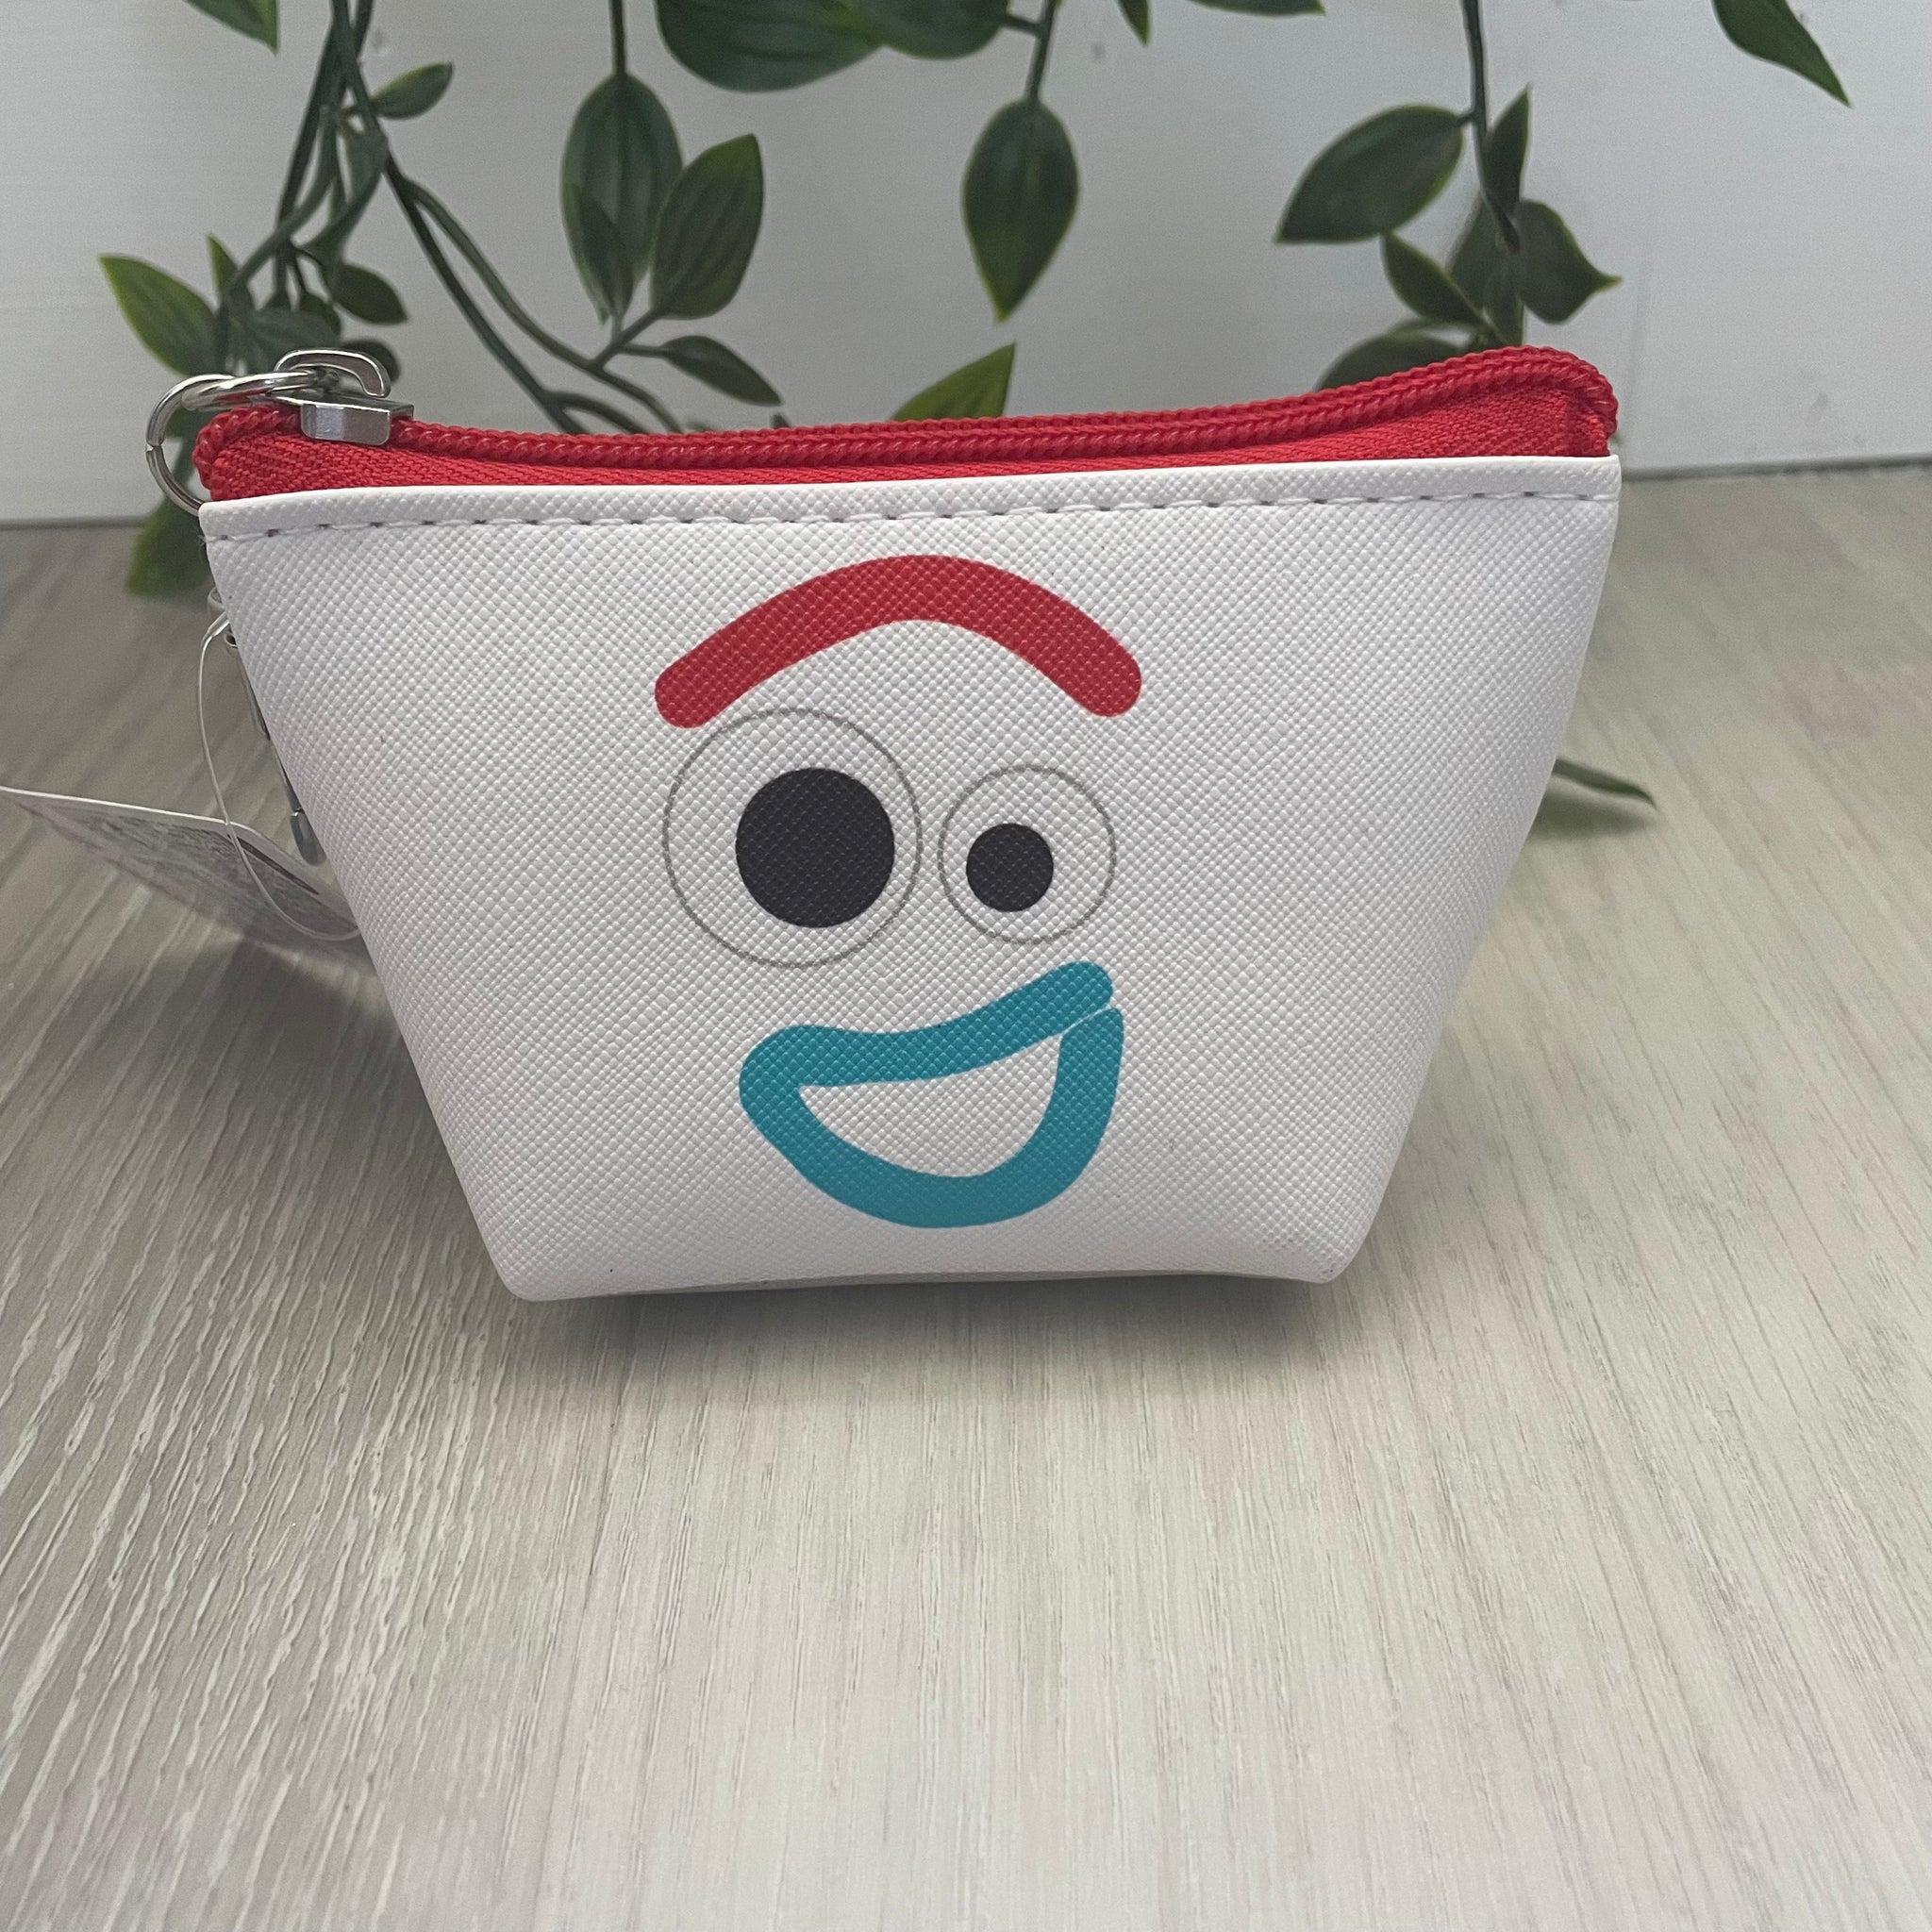 Toy Story Forky Face Coin Purse Bag